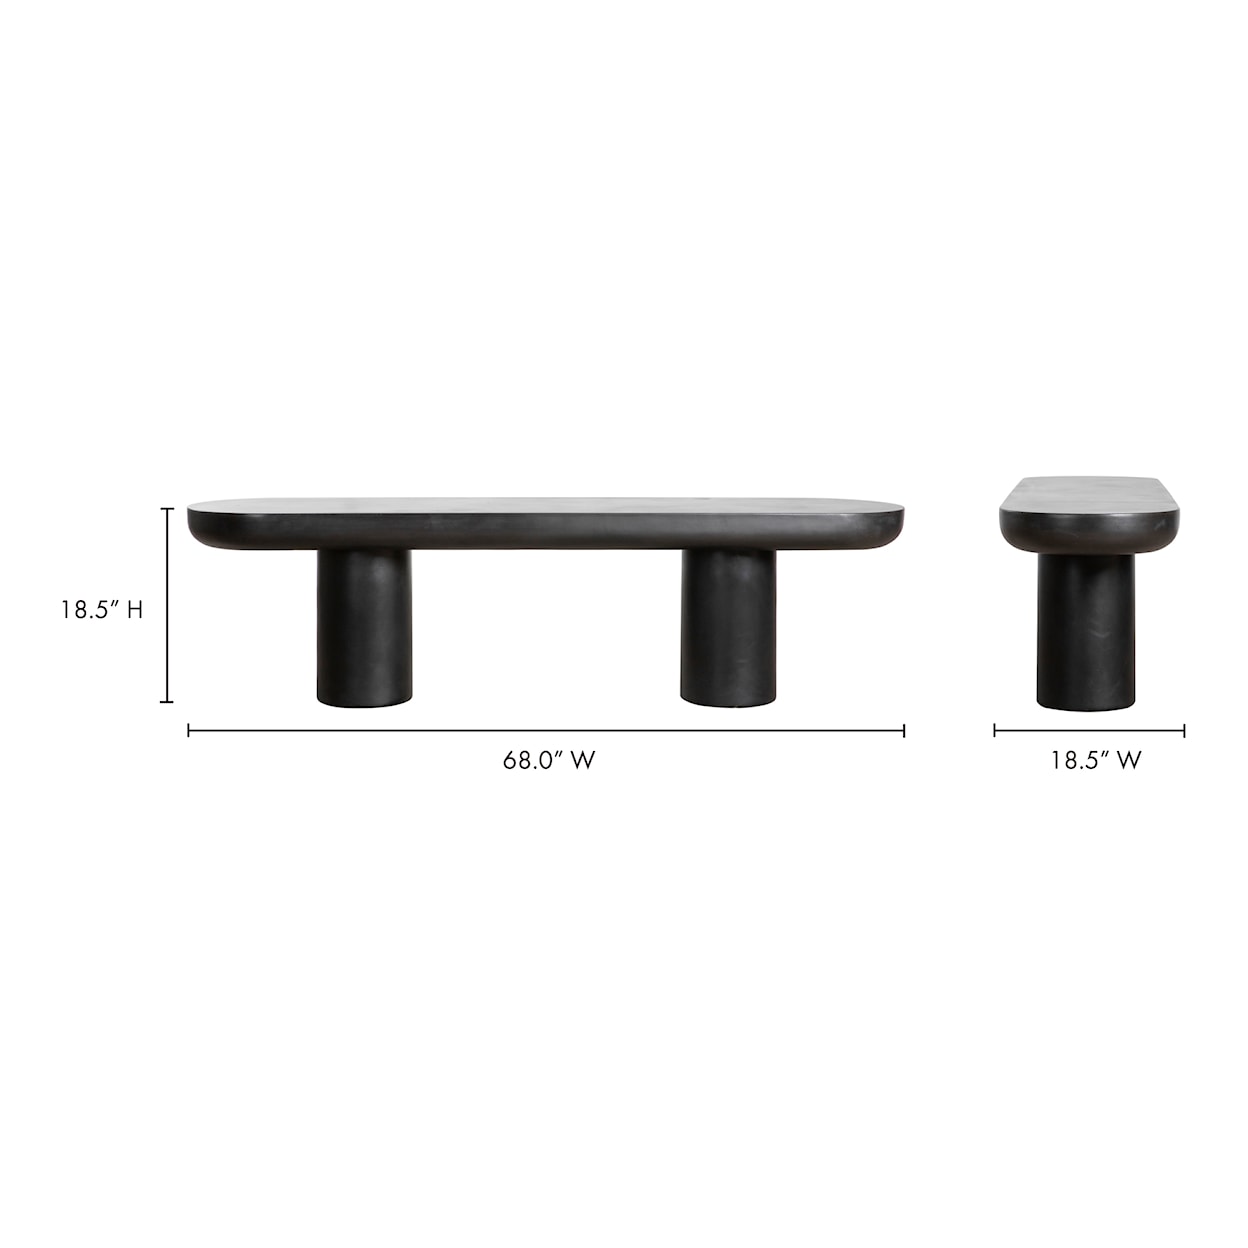 Moe's Home Collection Rocca Rocca Bench